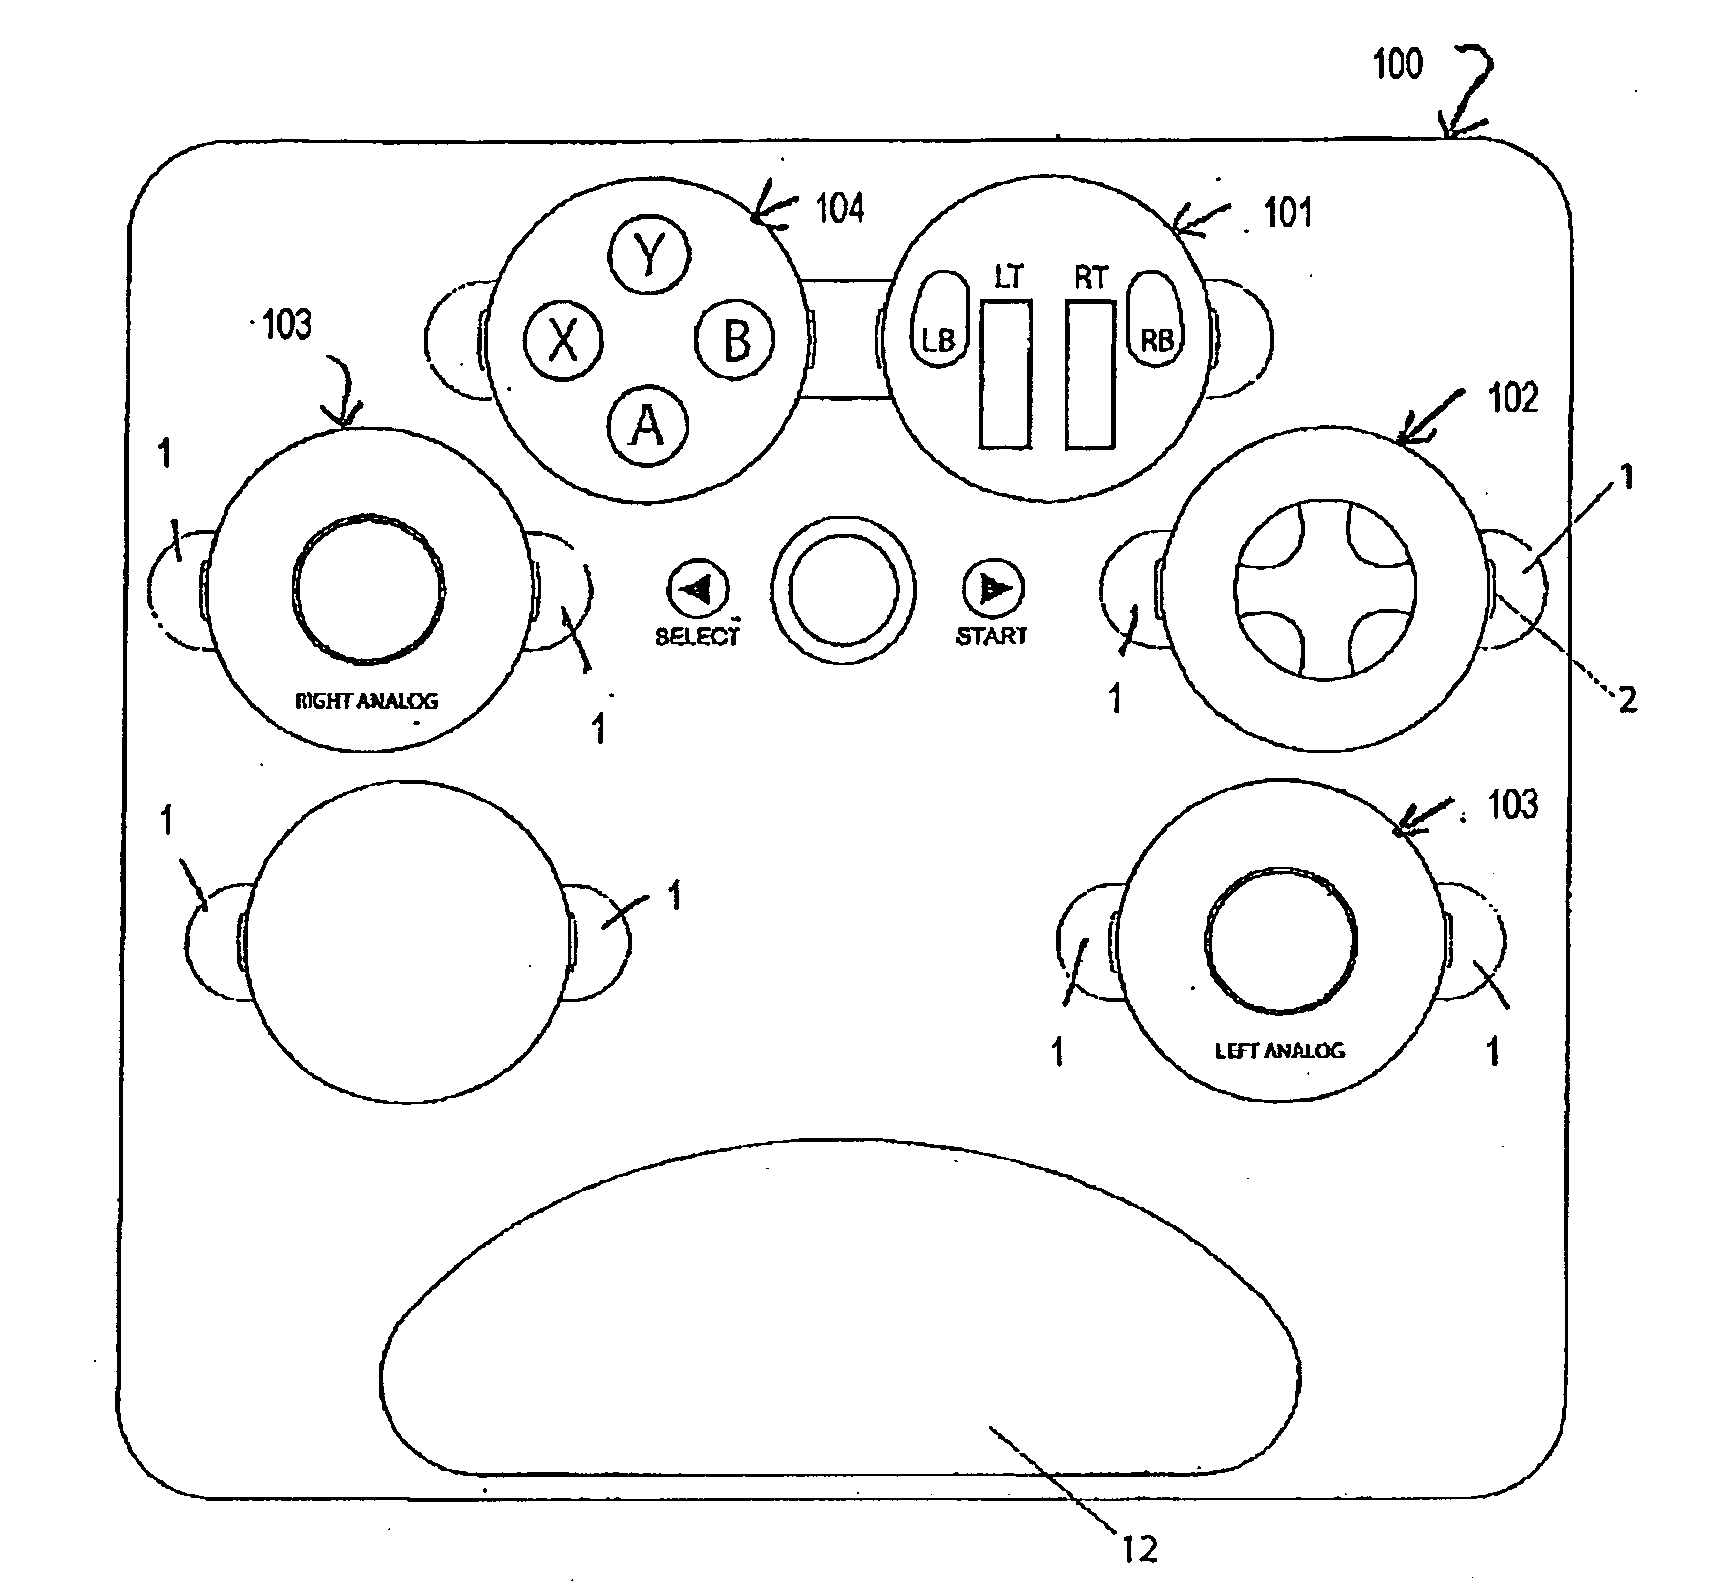 Configurable single handed video game controller